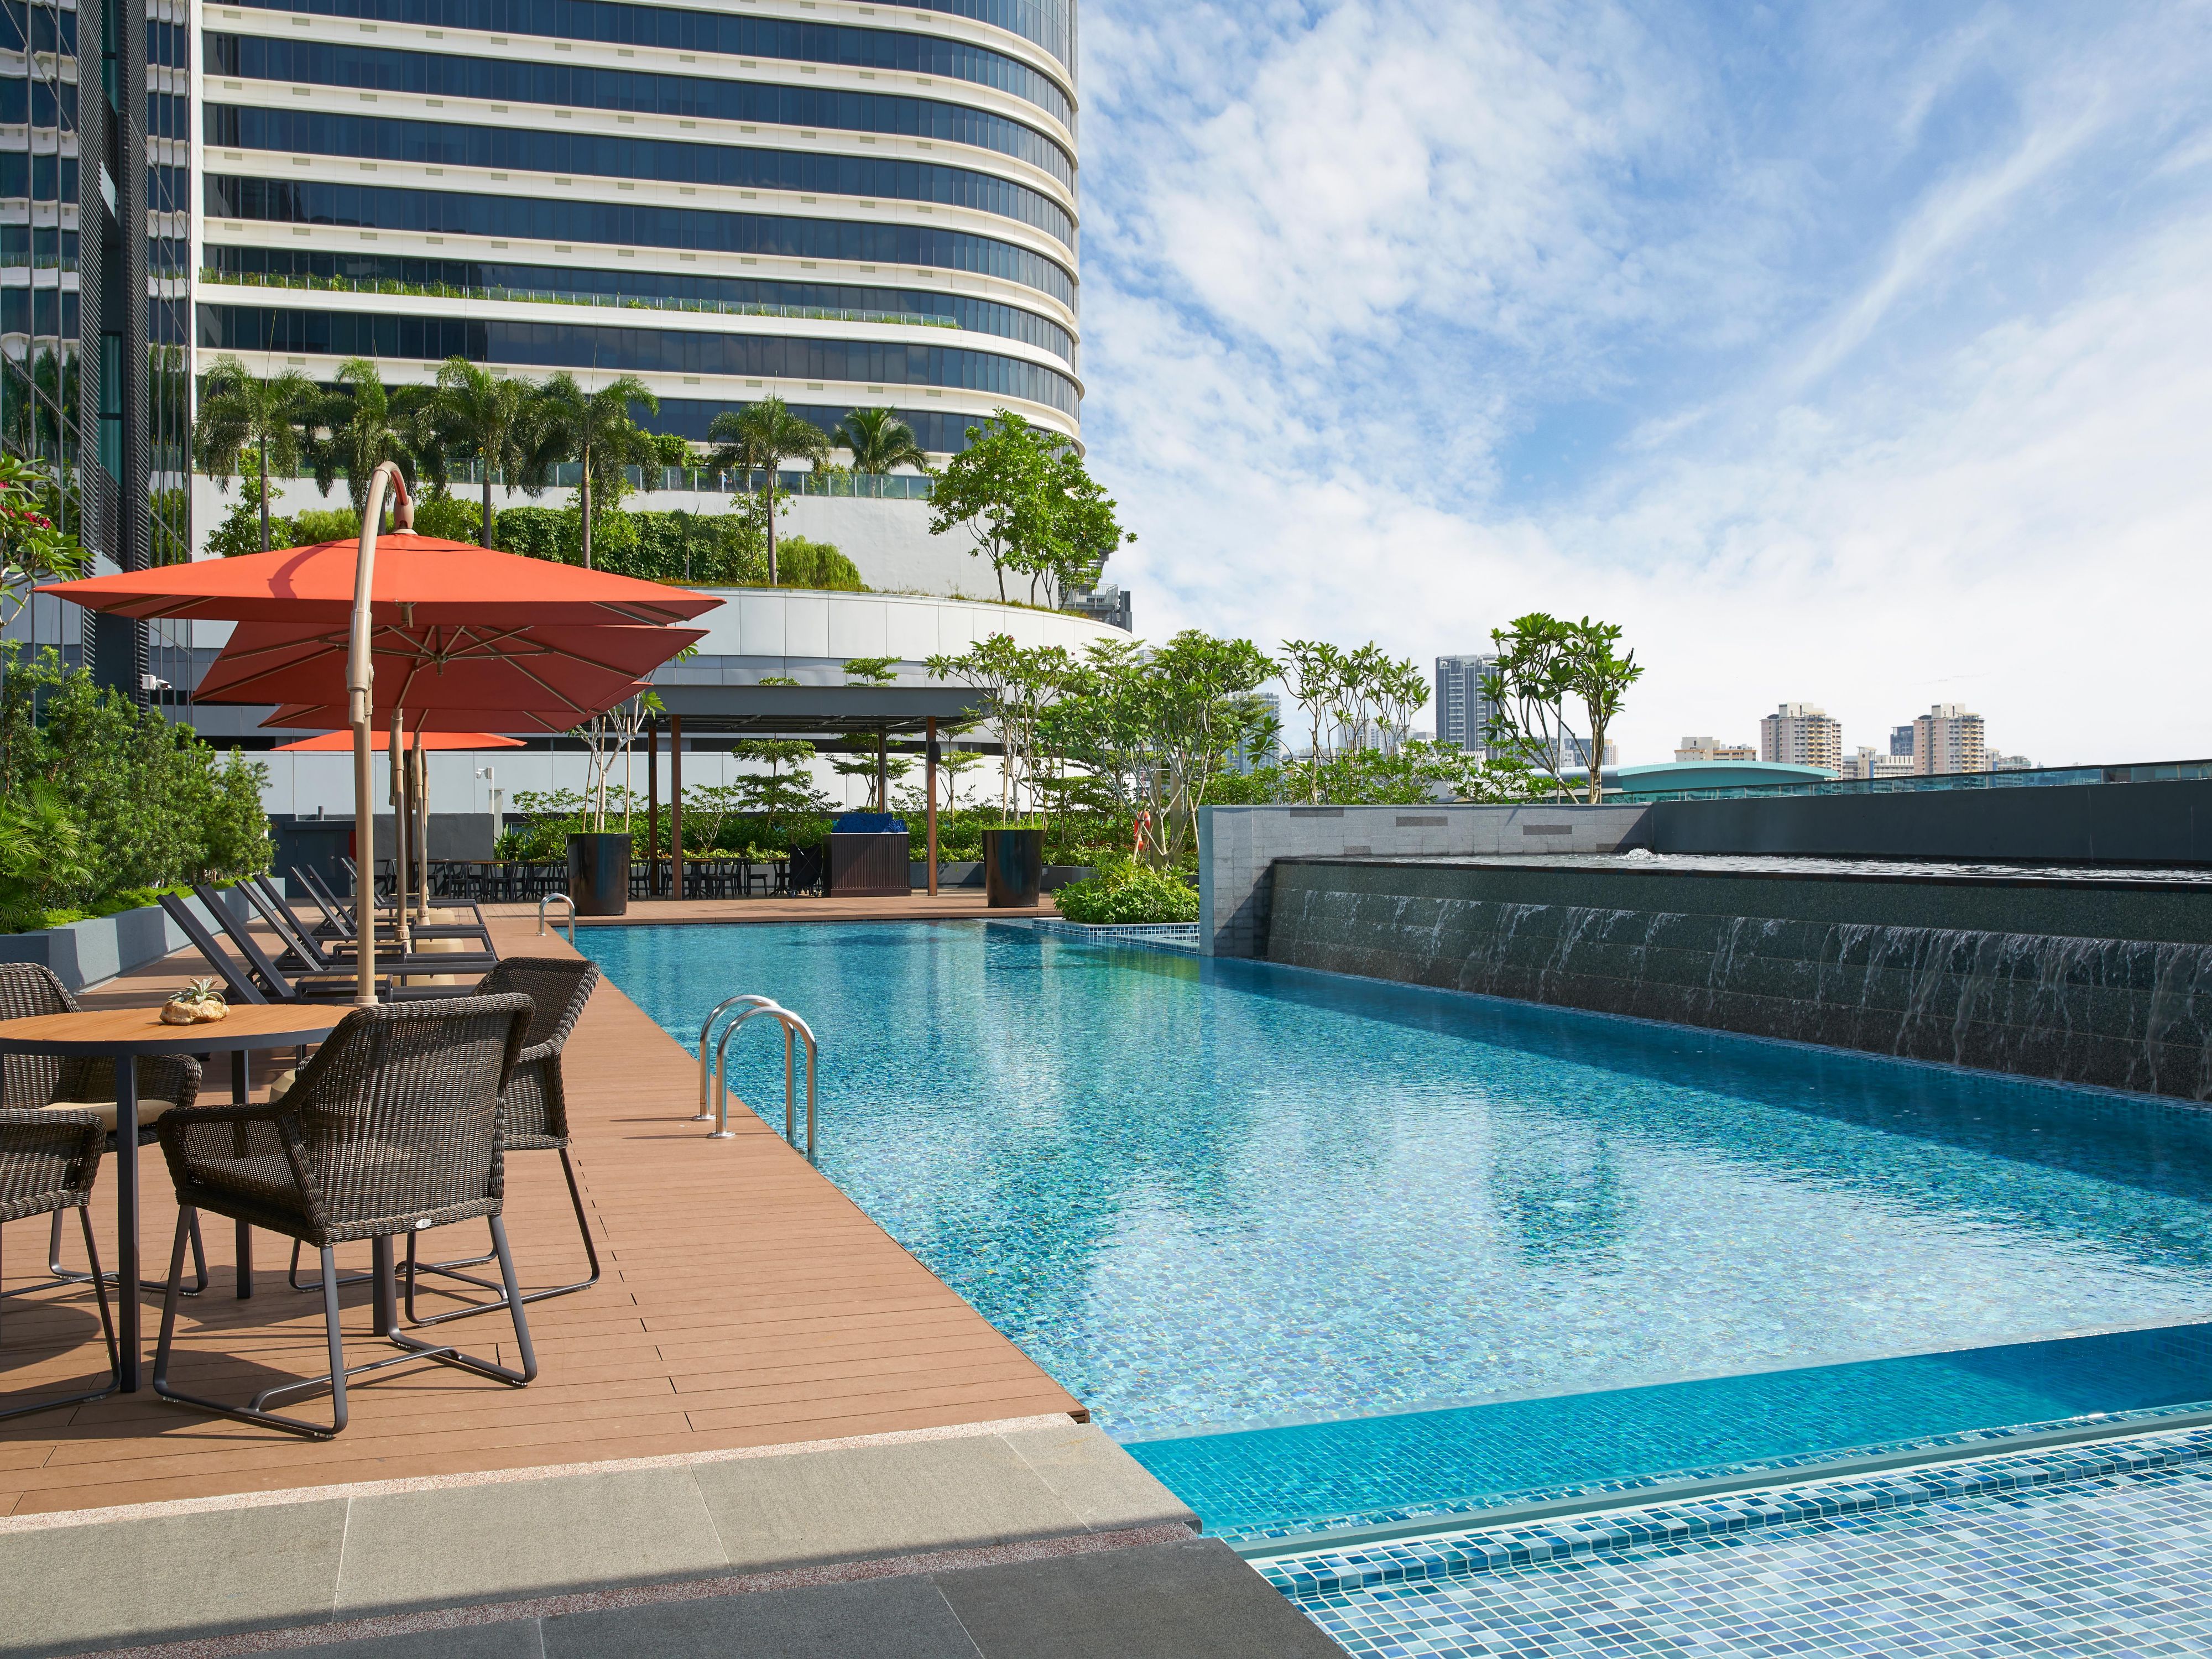 Our outdoor pool located on Level 5, right next to our all-day dining restaurant and bar will give you relaxation and rejuvenation like no other! Book your stay now to relax while you enjoy stunning city views.